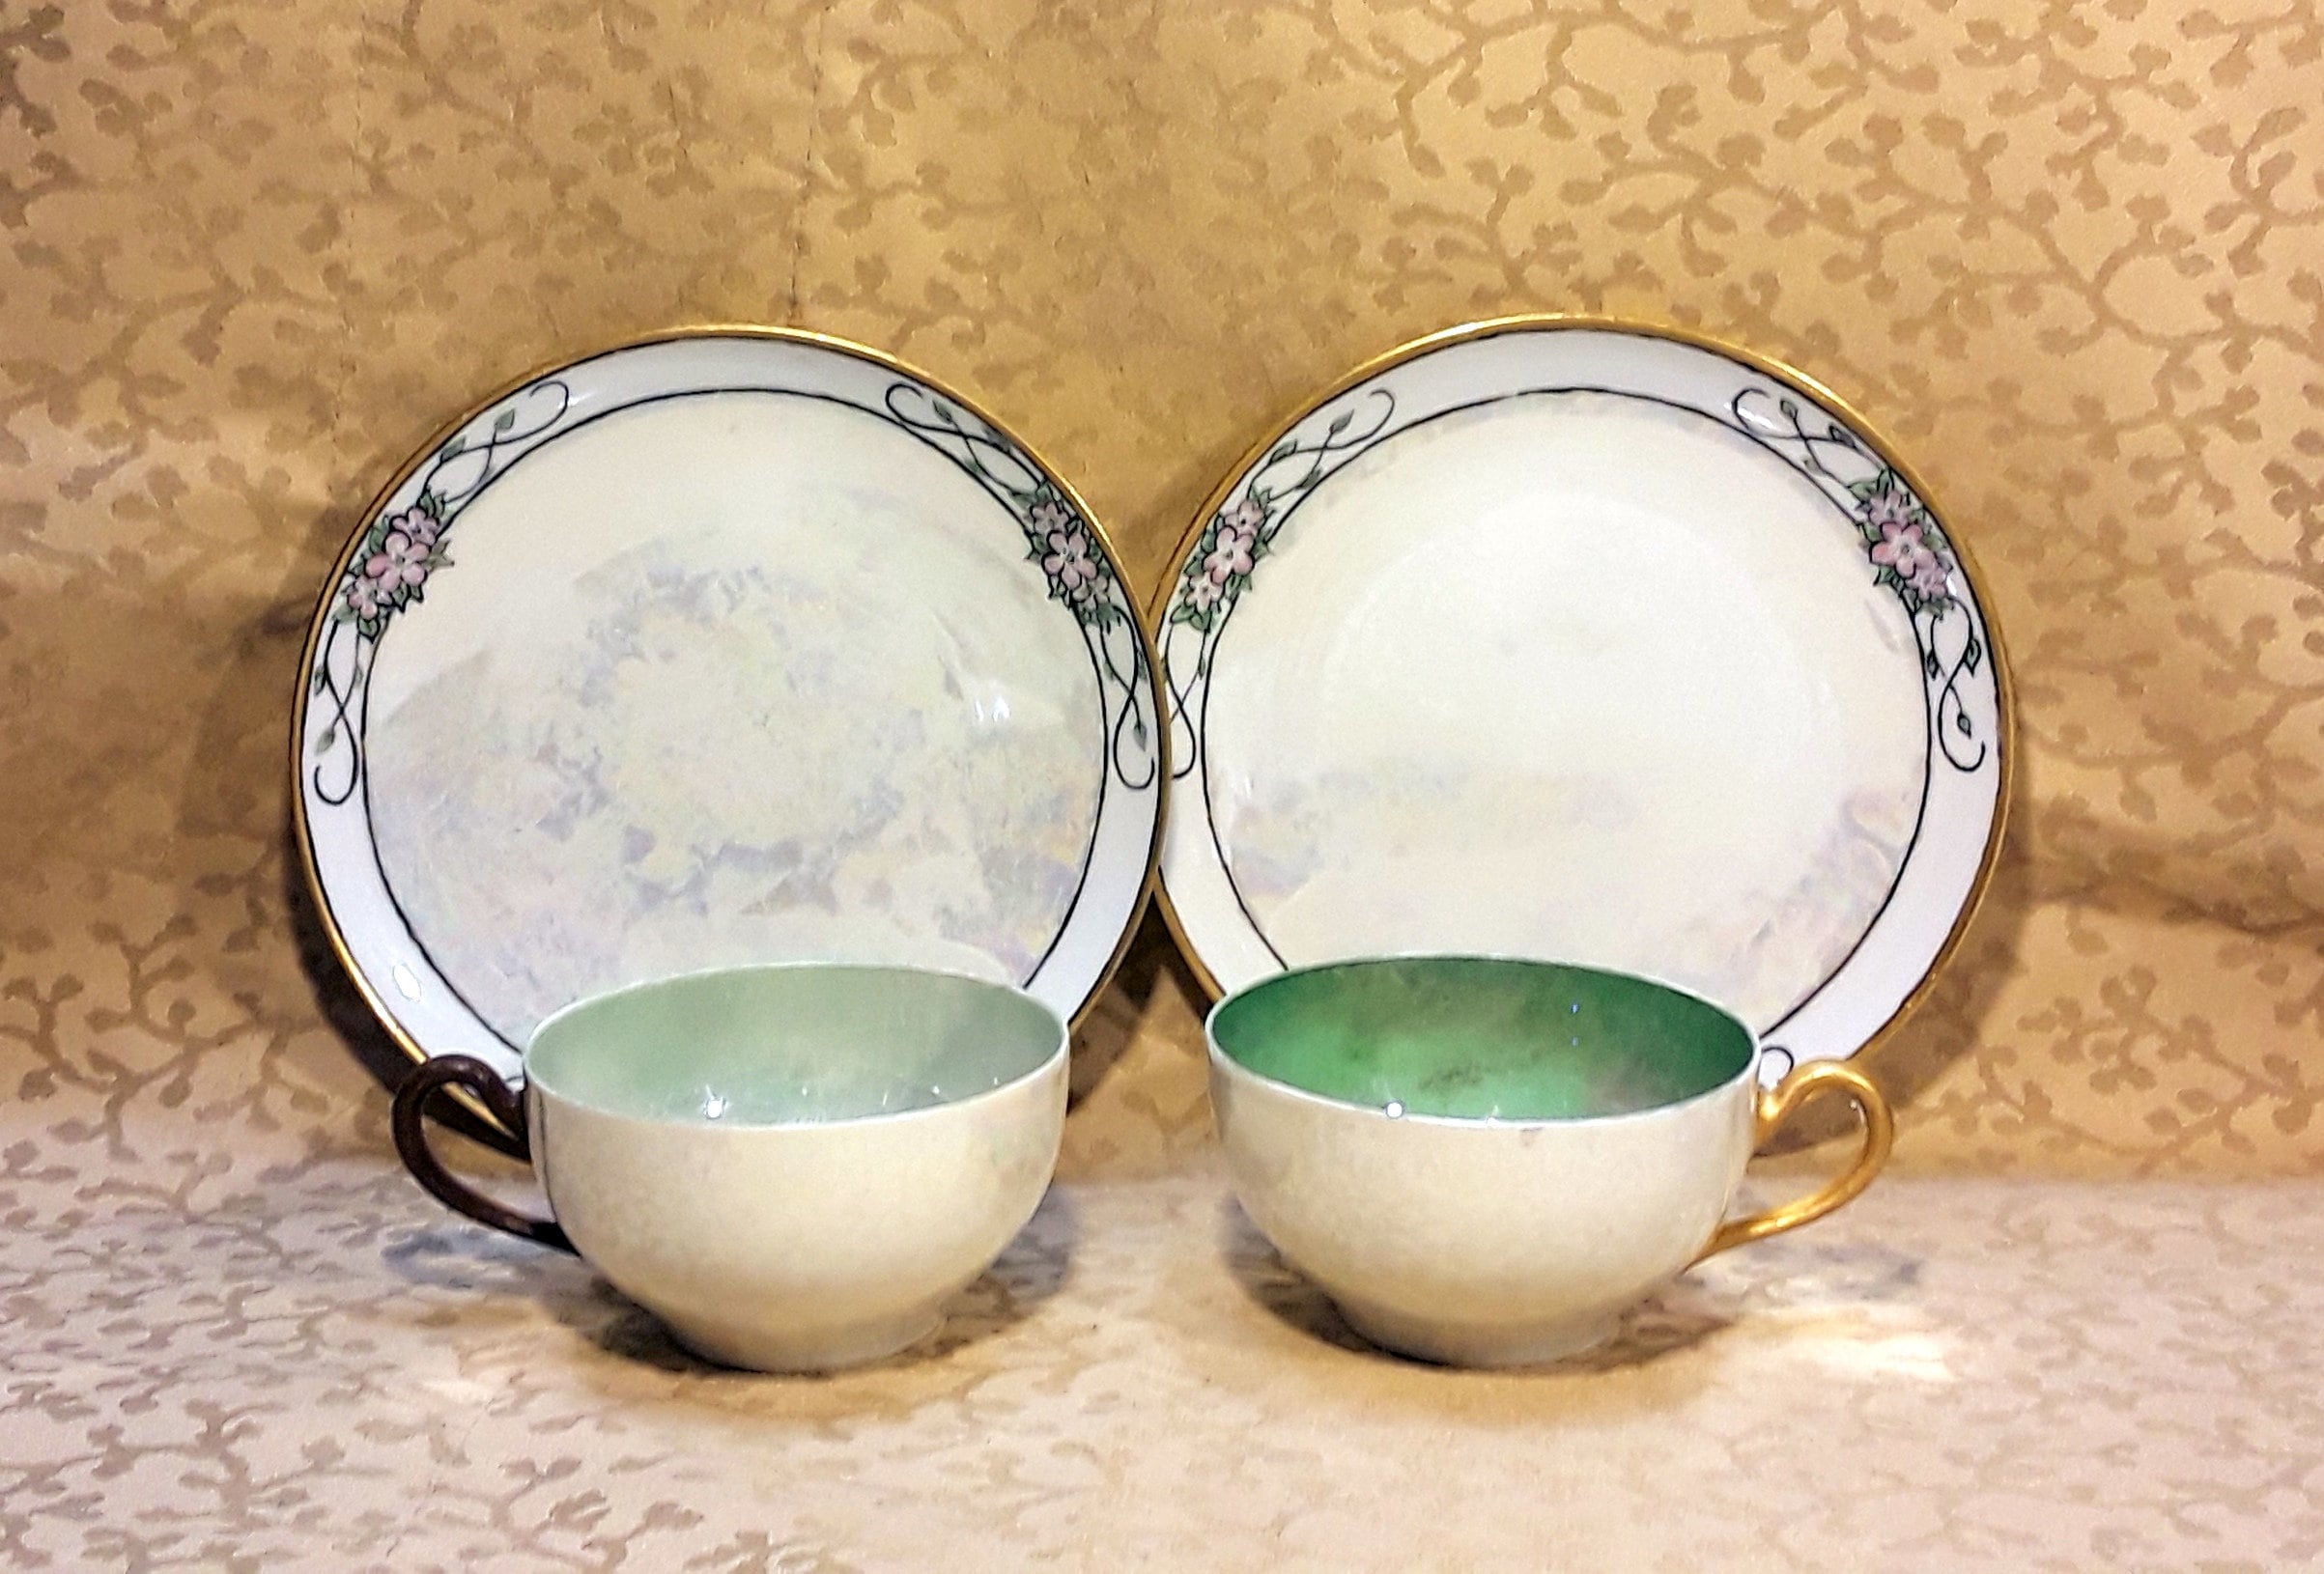 Antique Pair Cup and Saucer Set Hand Painted Art Deco Lustre Paul Muller Shabby Cottage Chic